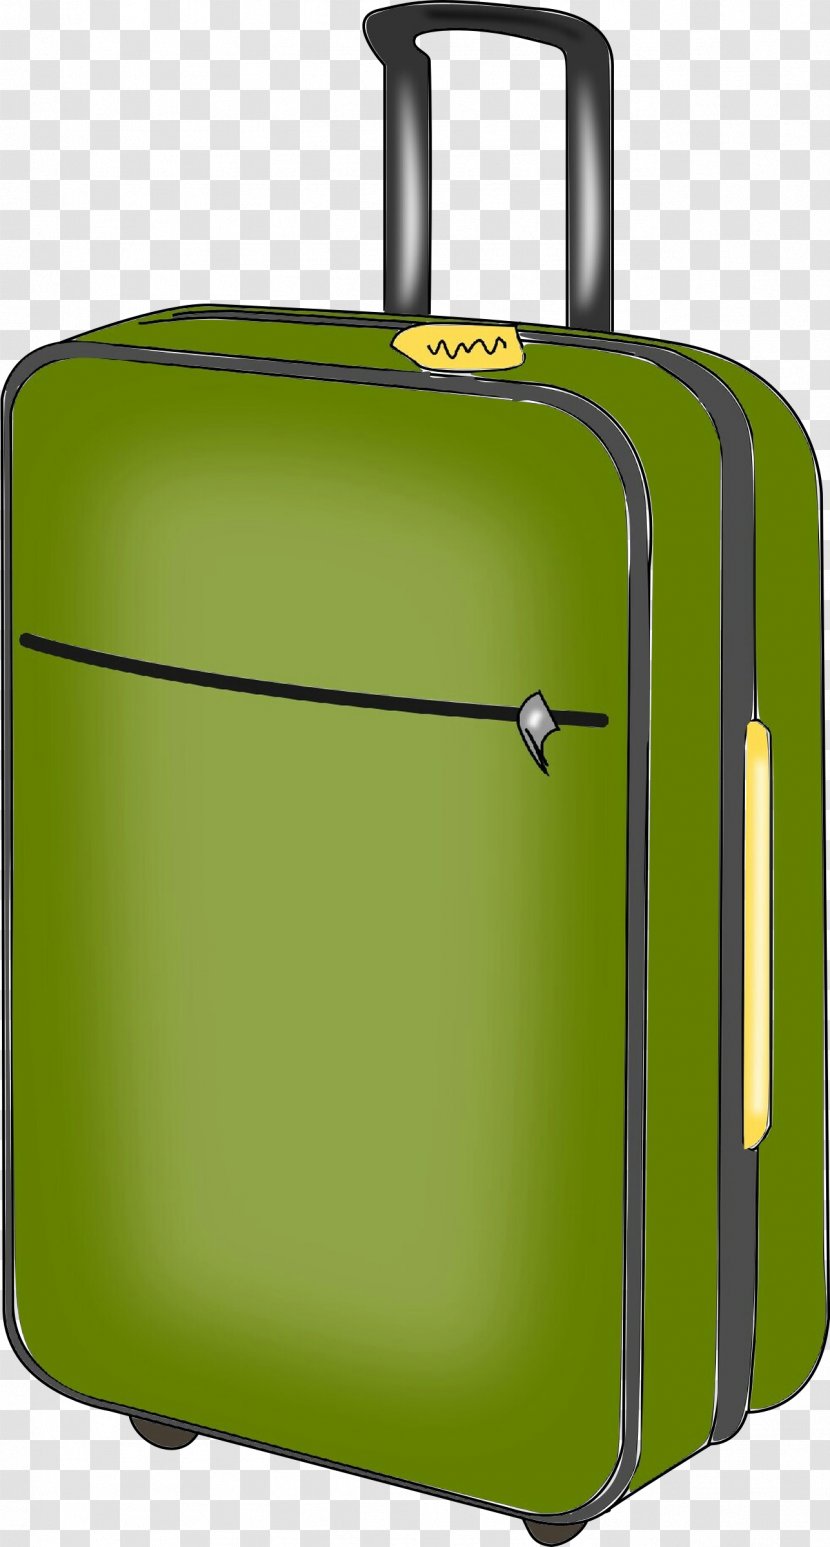 Suitcase Green Hand Luggage Baggage And Bags Transparent PNG